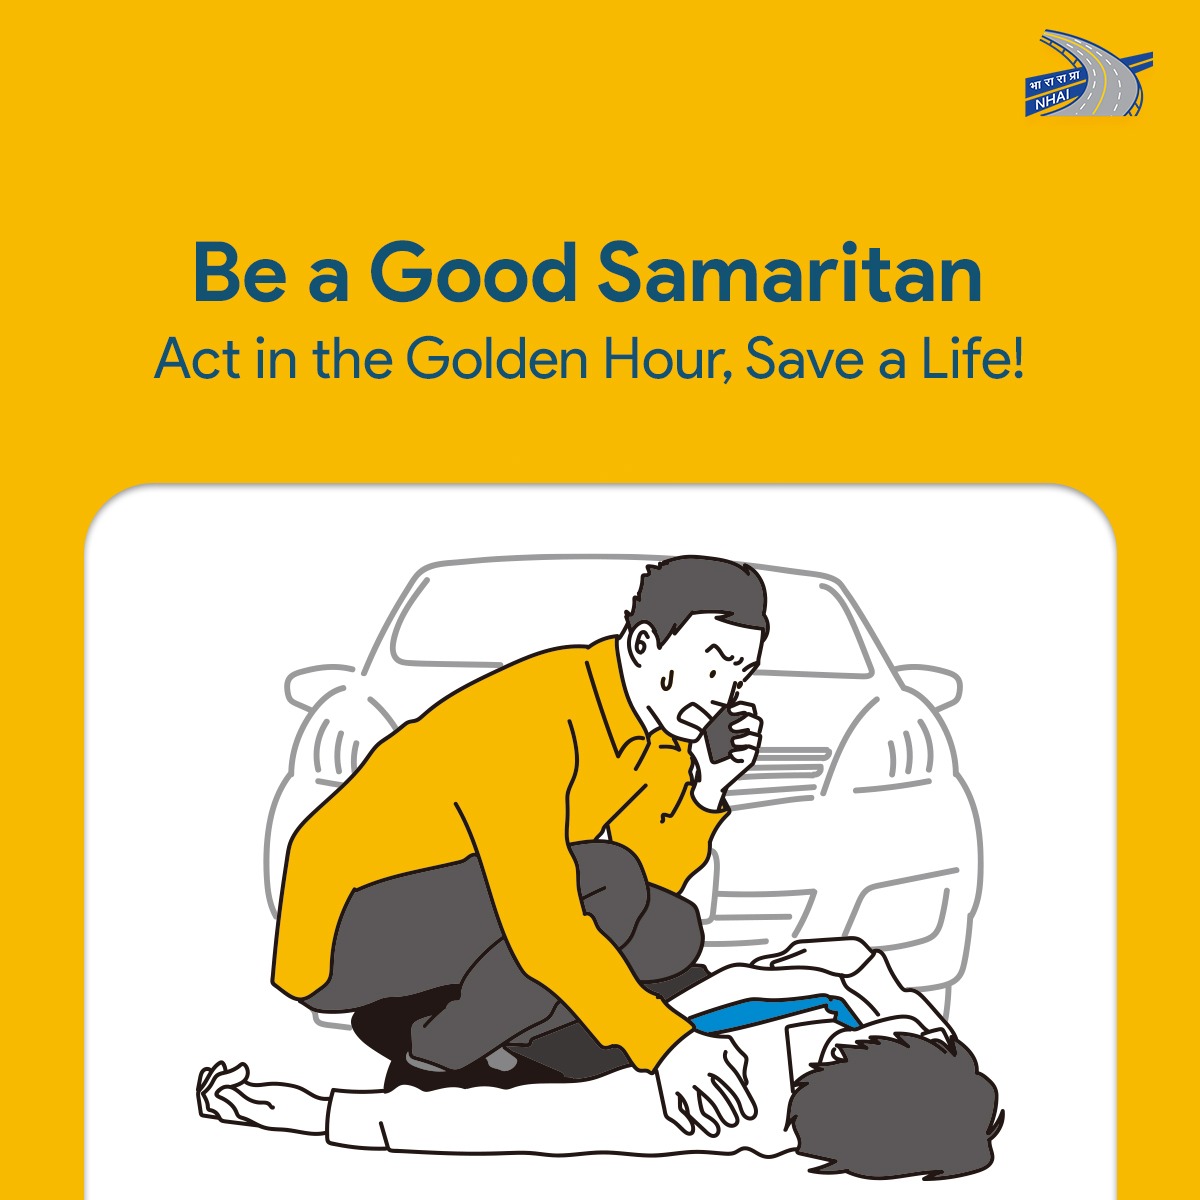 Your actions can make a life-saving difference. #BeAGoodSamaritan and offer a helping hand to road accident victims, especially within the #GoldenHour. #NHAI #BuildingANation